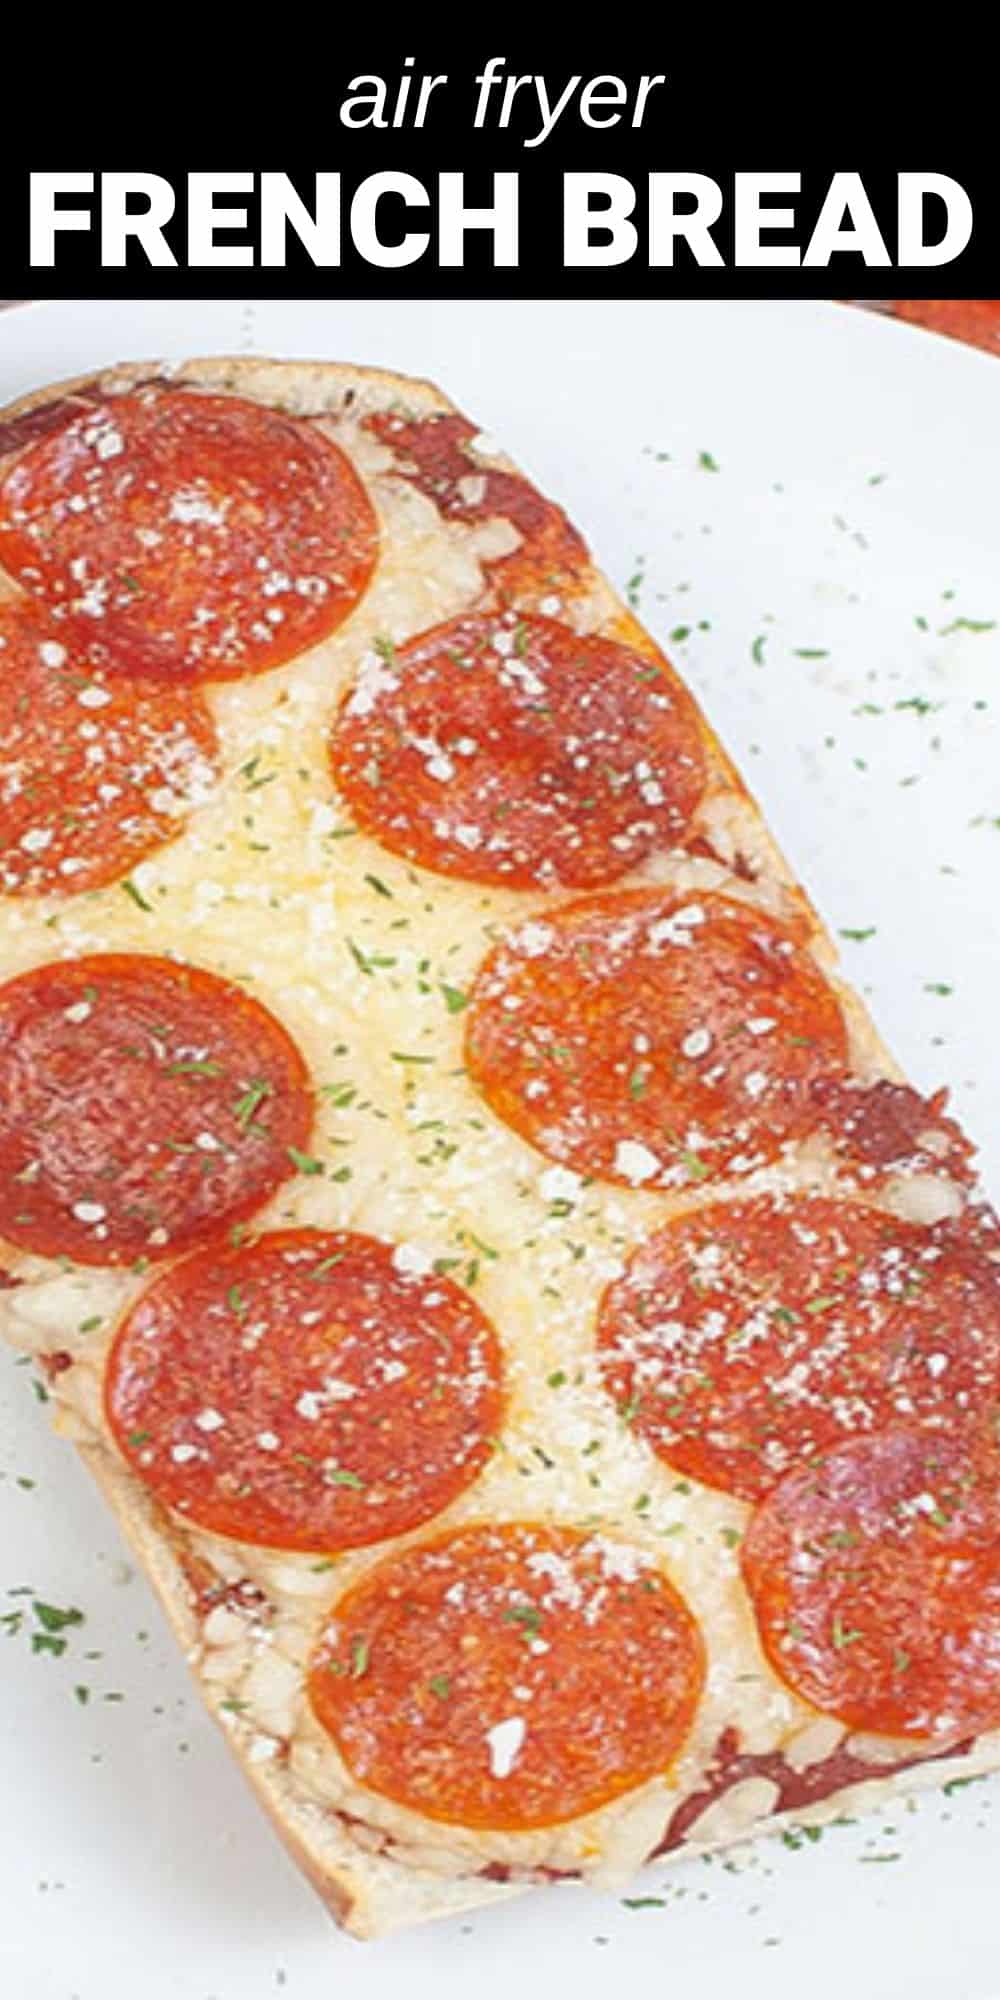 This easy air fryer French bread pizza is so quick and delicious that you’ll never need to order a takeout pizza again.